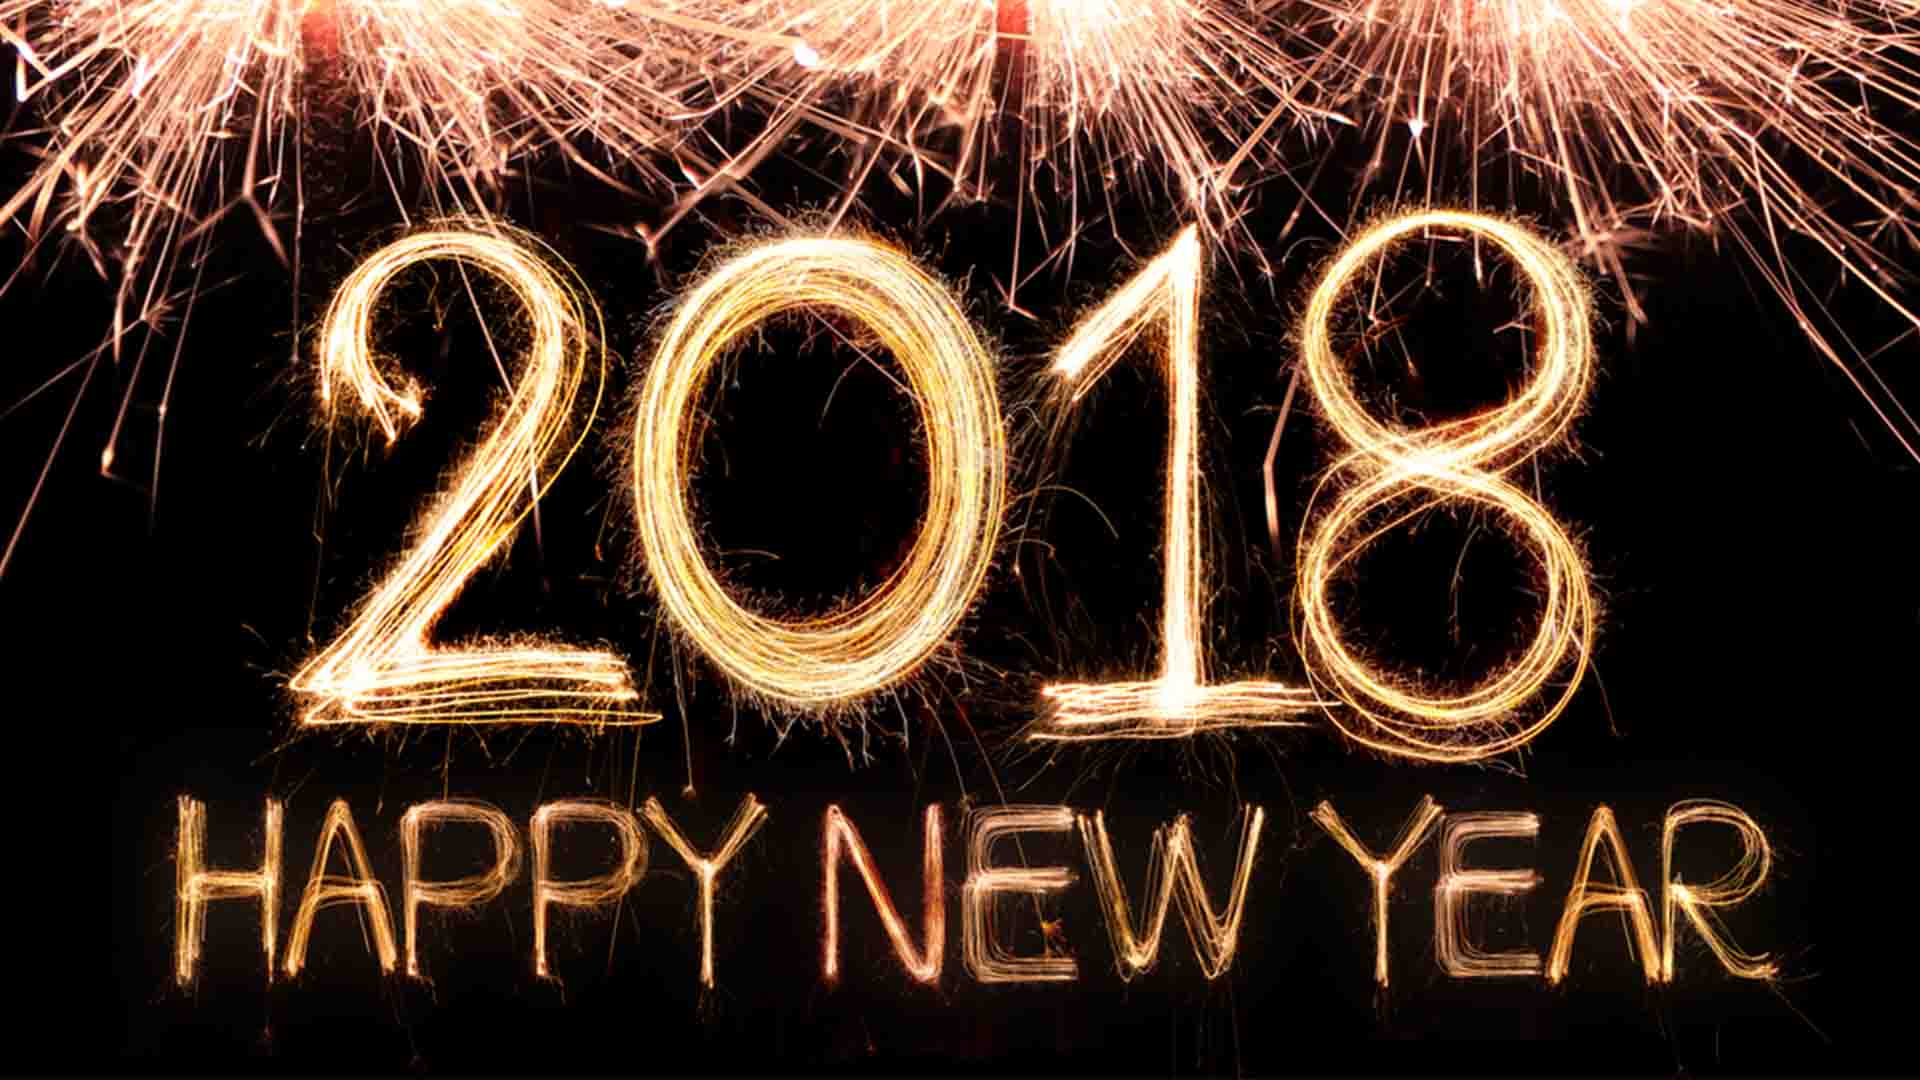 Happy New Year 2018 | New Year Fireworks - 9to5 Car Wallpapers
